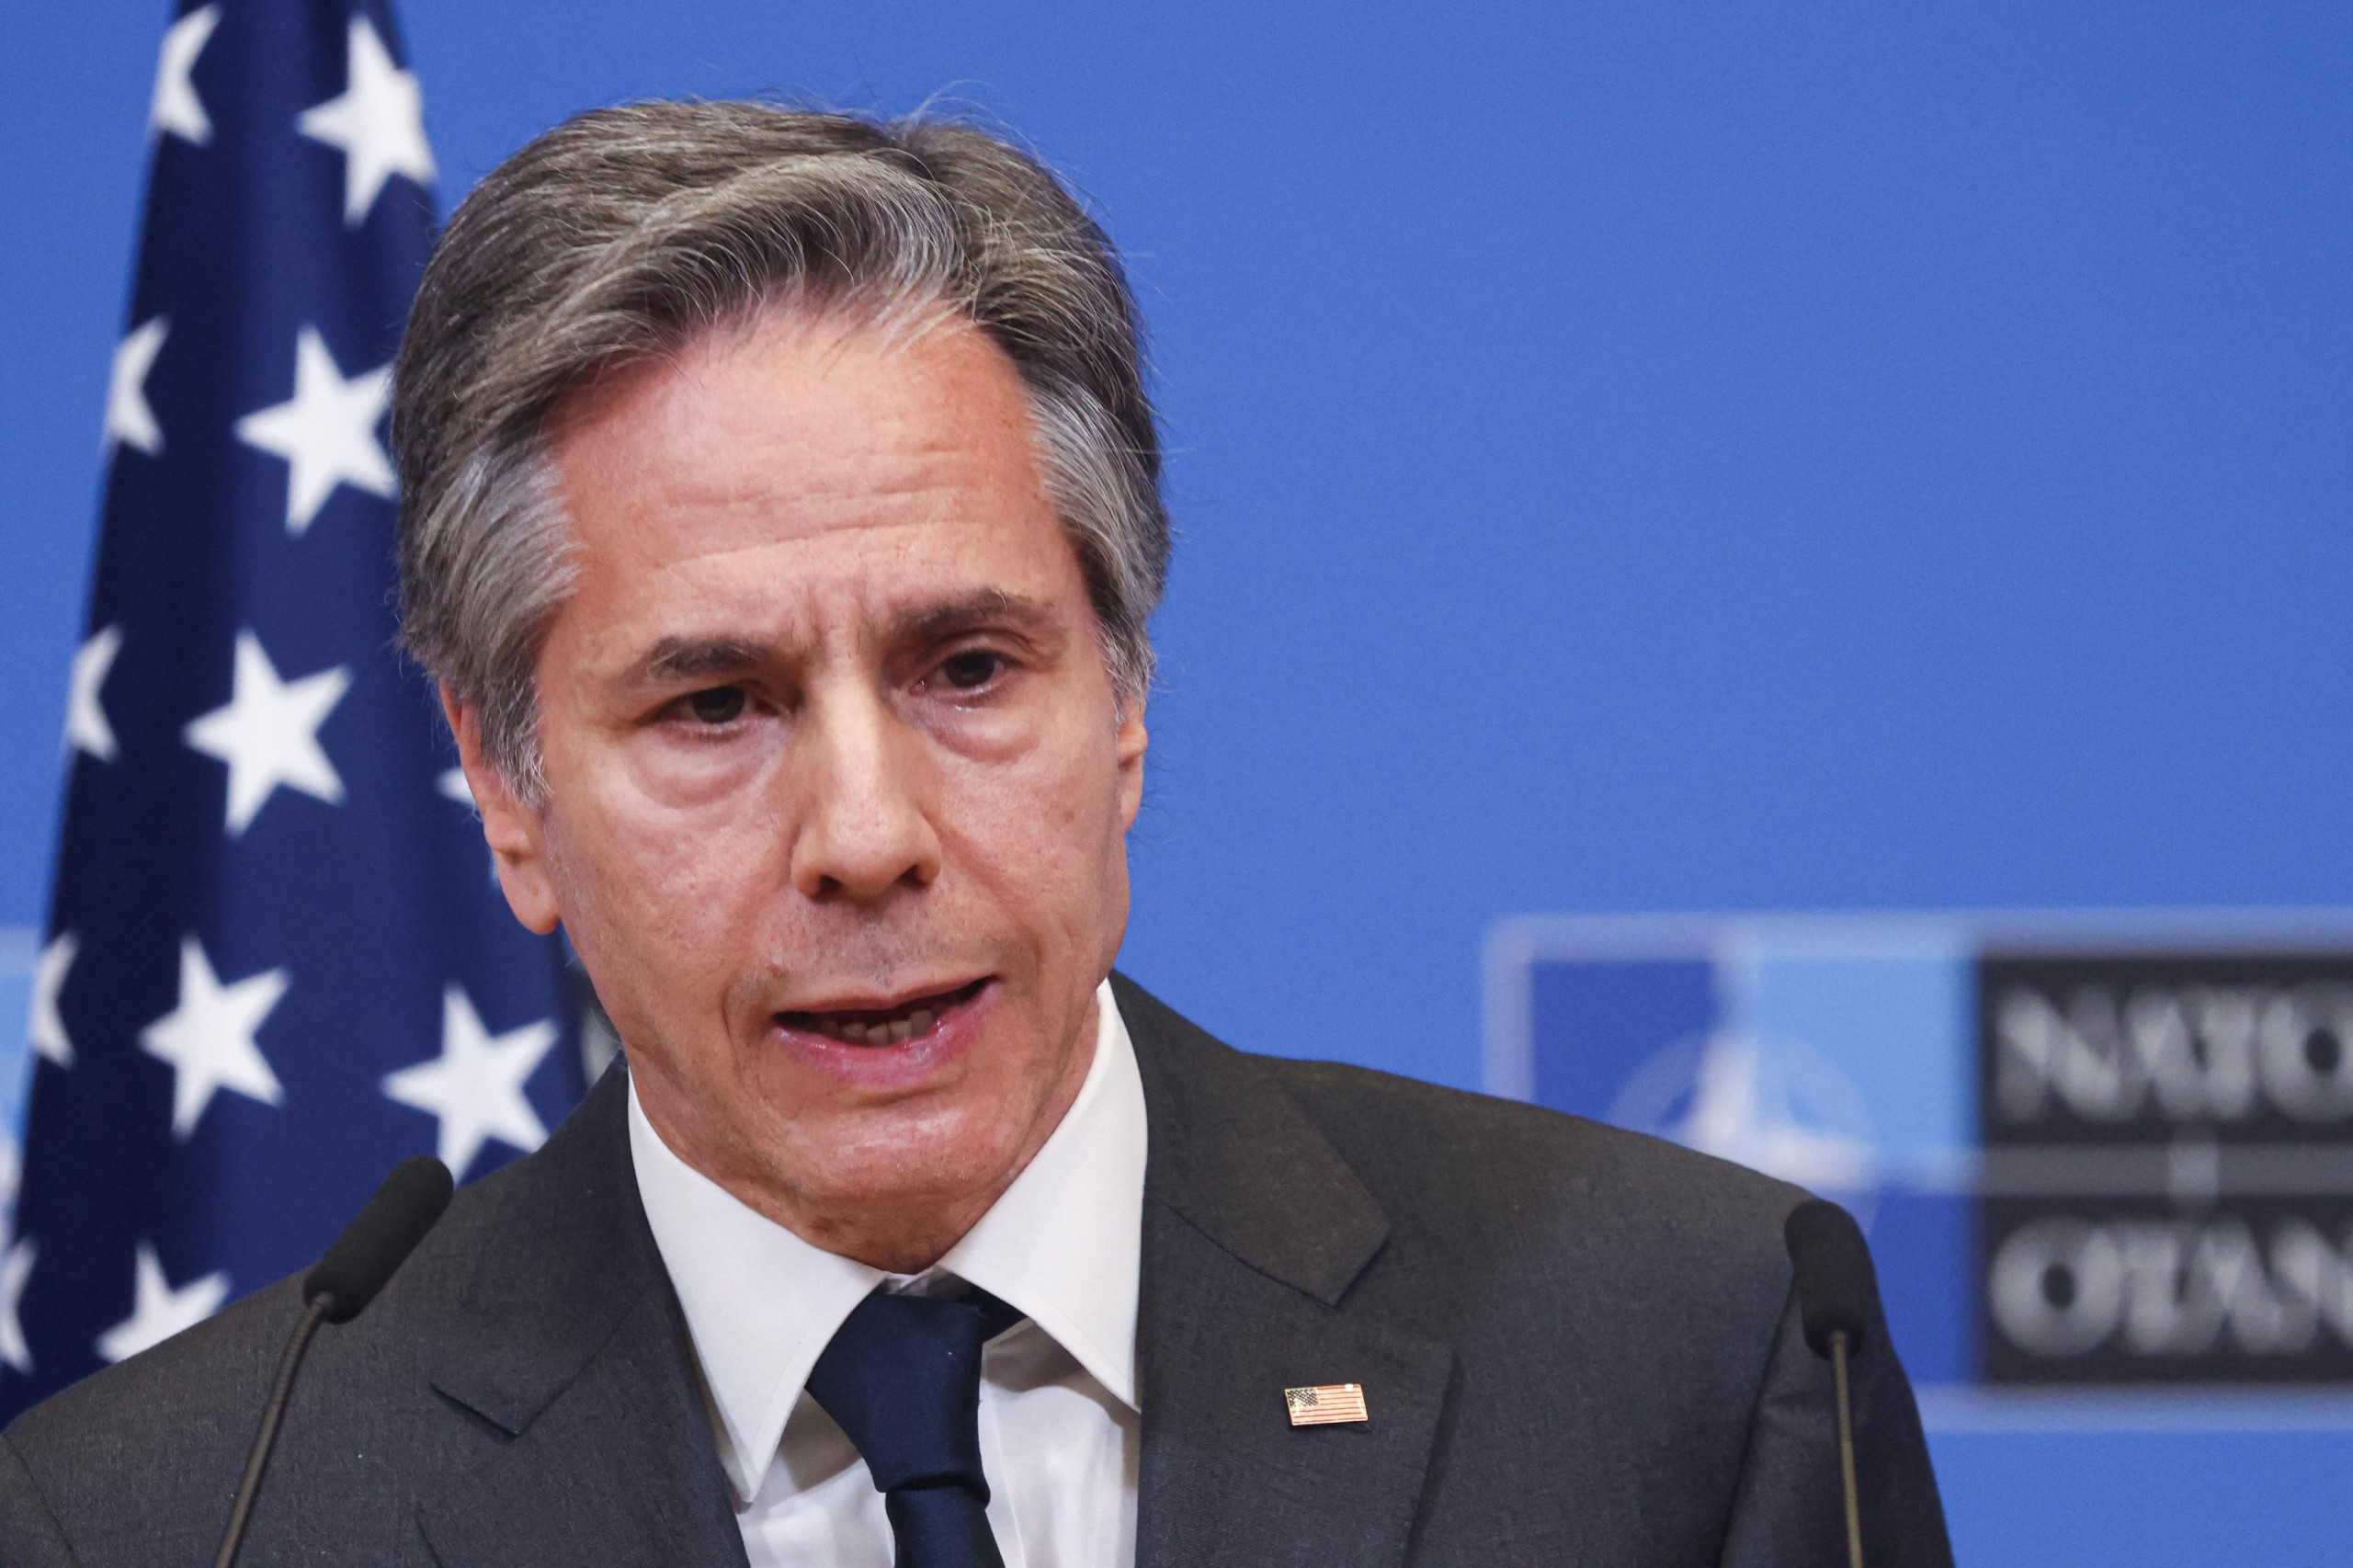 U.S. Secretary of State Antony Blinken speaks to the media after a NATO foreign ministers meeting, amid Russia's invasion of Ukraine, at NATO headquarters in Brussels, Belgium April 7, 2022. REUTERS/Evelyn Hockstein/Pool Photo: Evelyn Hockstein/REUTERS